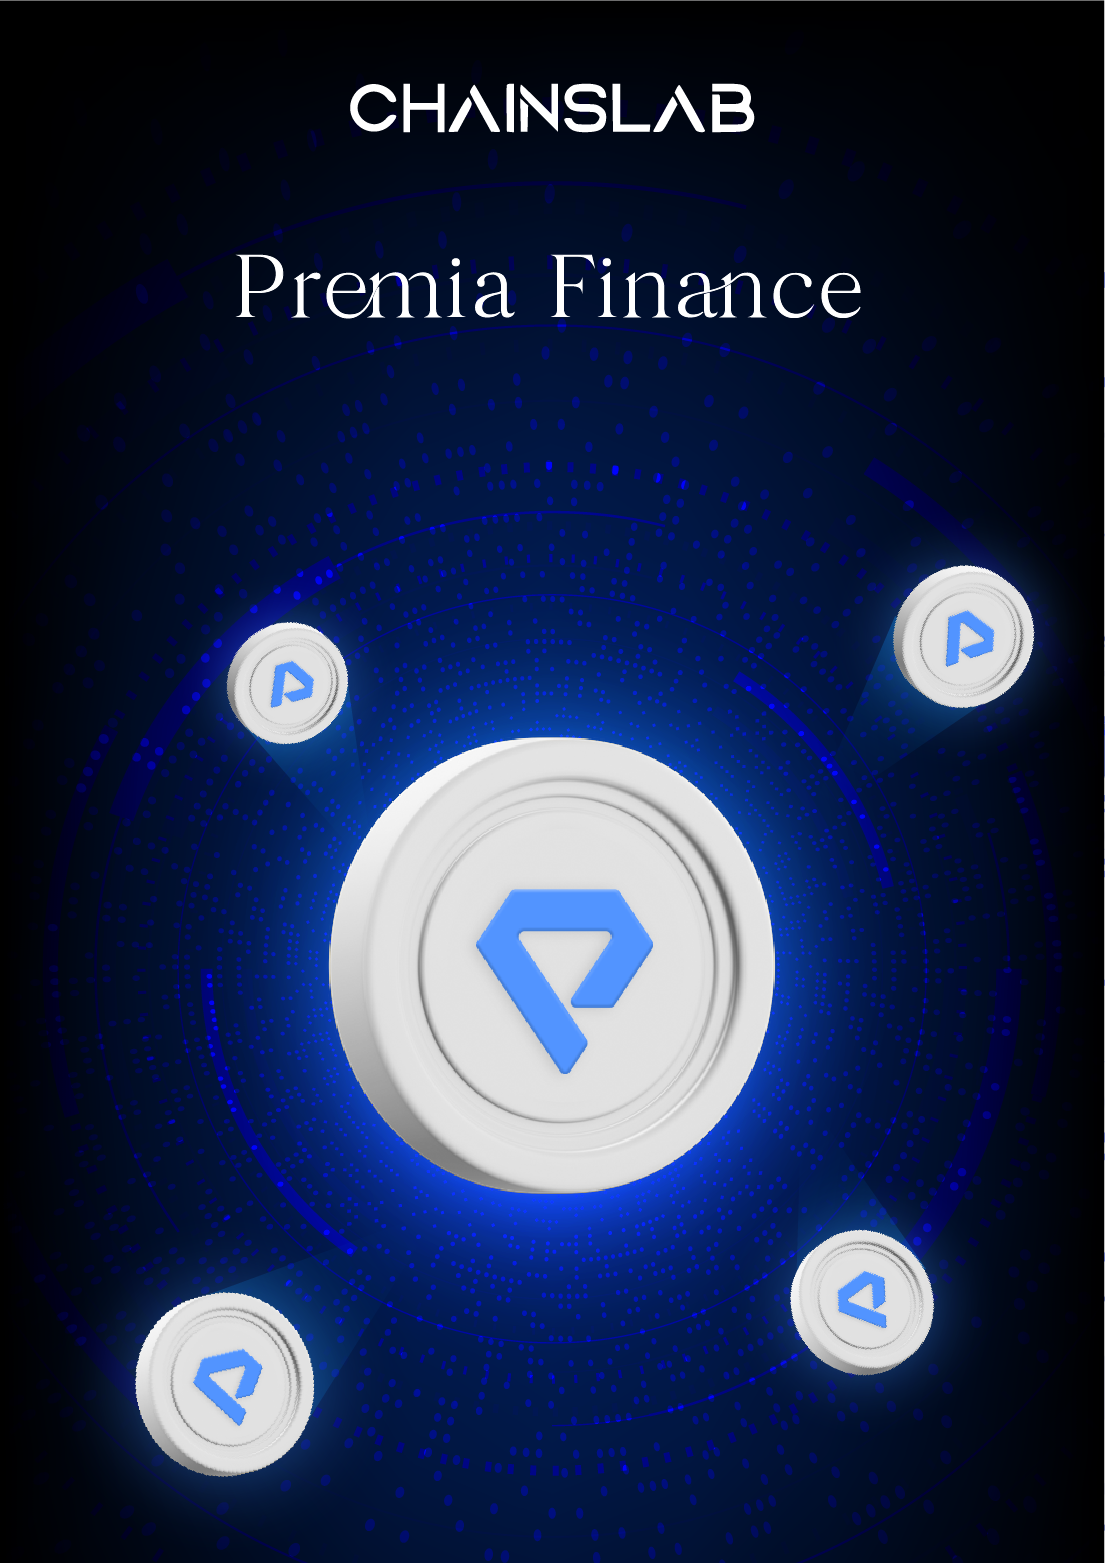 Premia Finance - The Handsome Guy of Defi Options